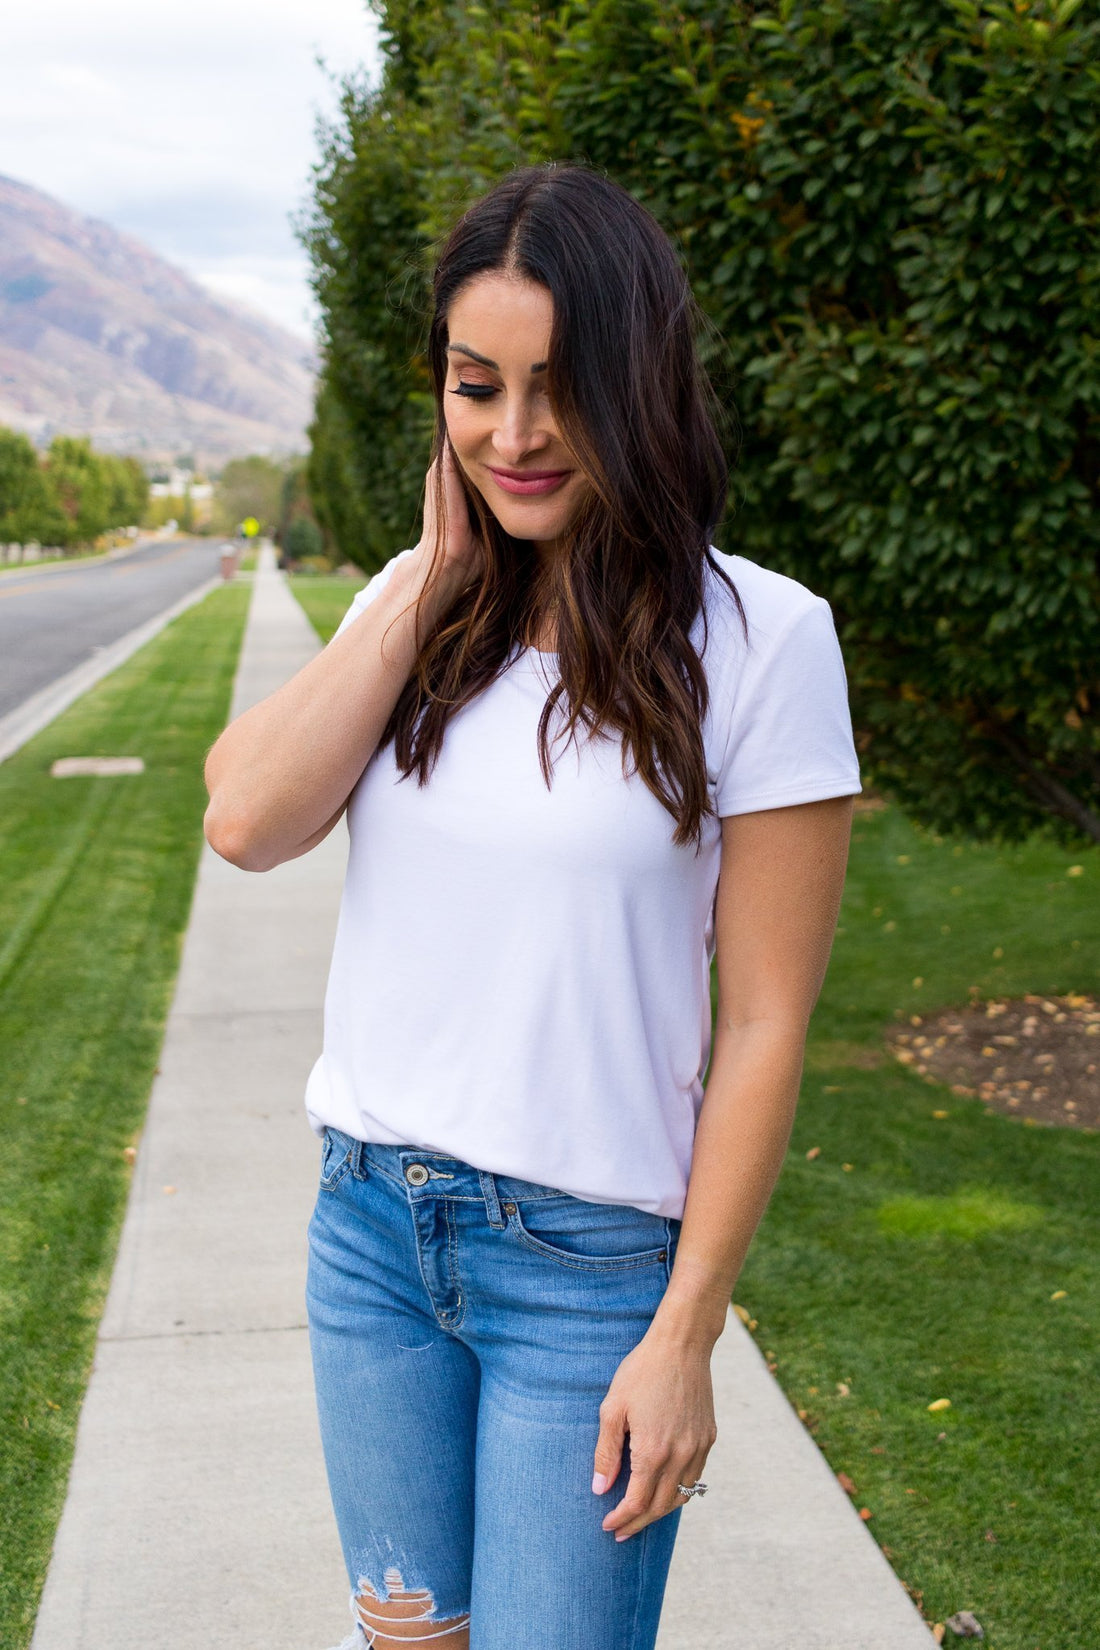 The Most Basic White Tee That Isn't See Through!